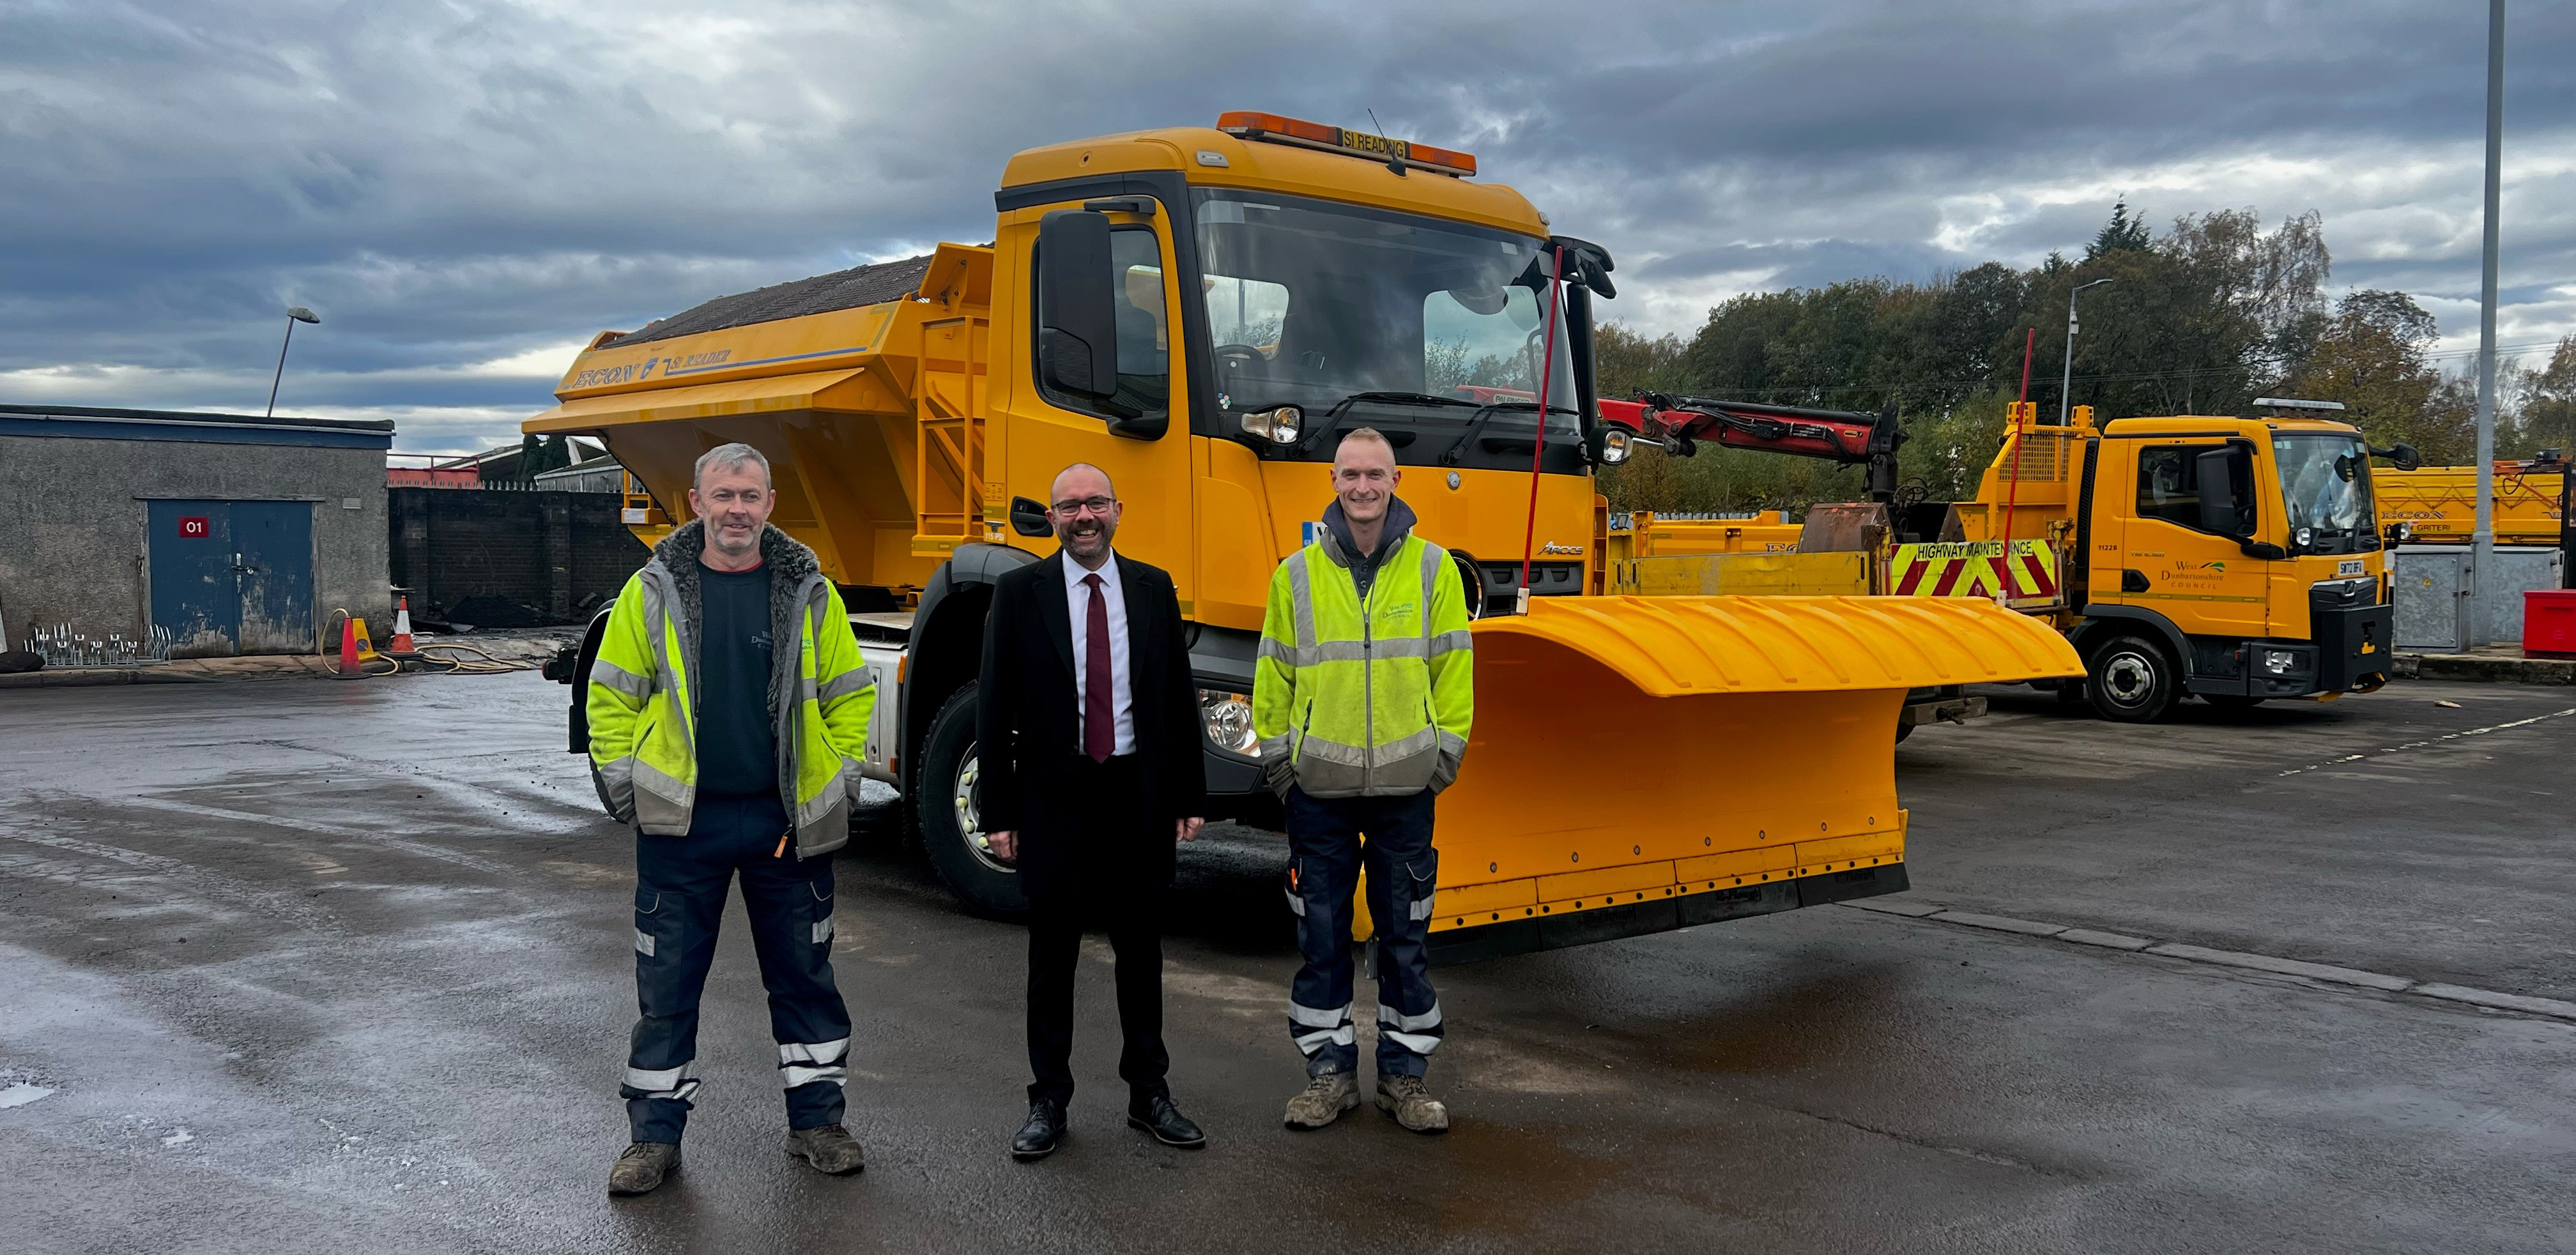 Councillor McBride stands with two members of the roads team in front of gritter